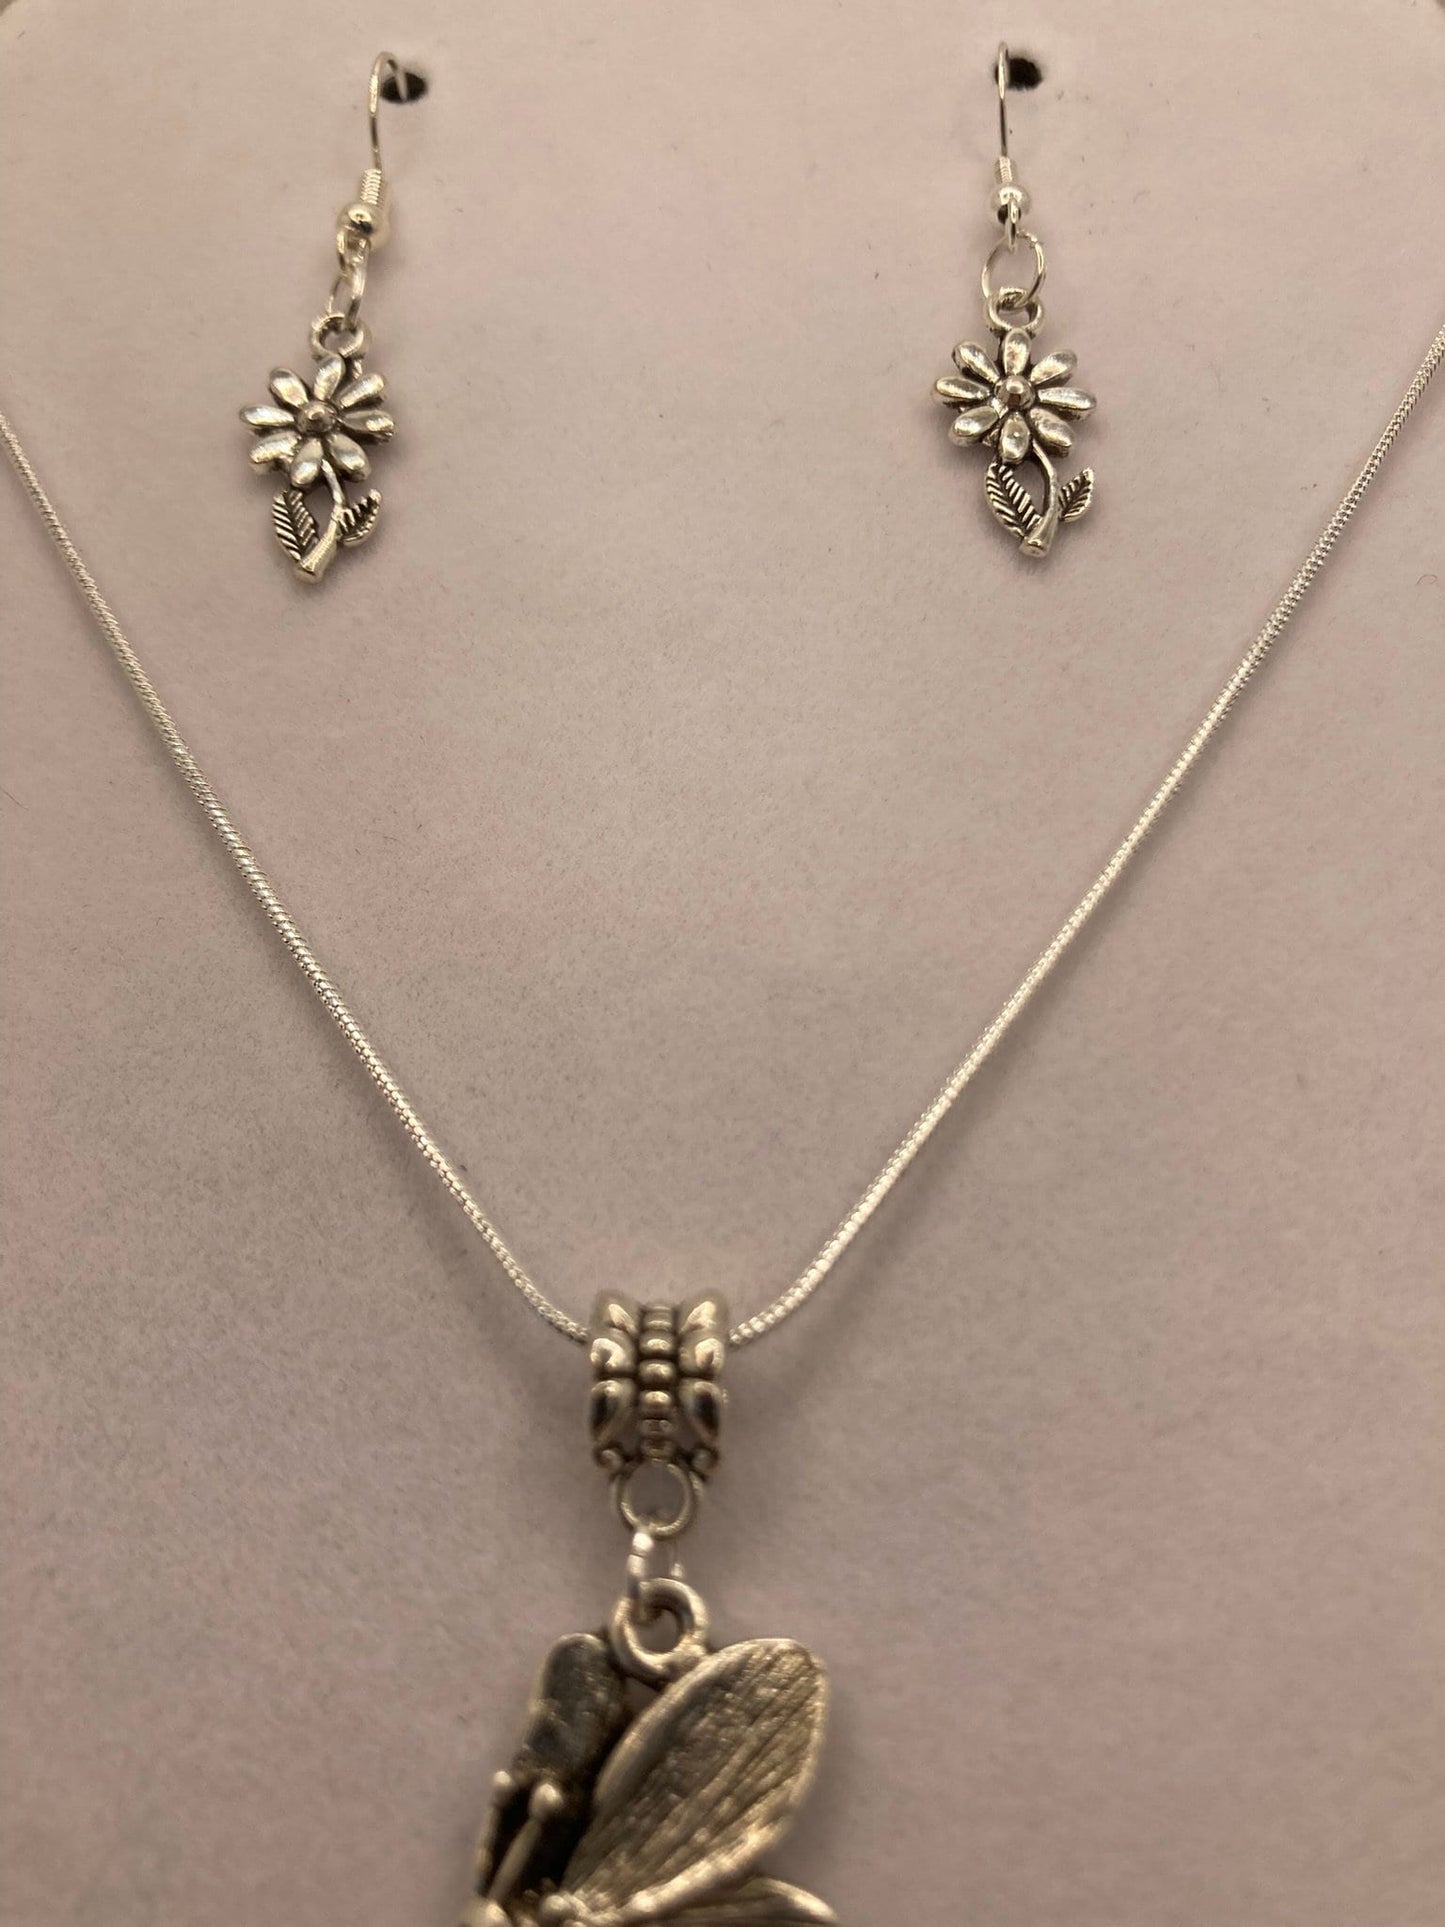 Bee Necklace and Flower Earring Set with Specialty Chain, Southwest, Religious and Country Jewelry